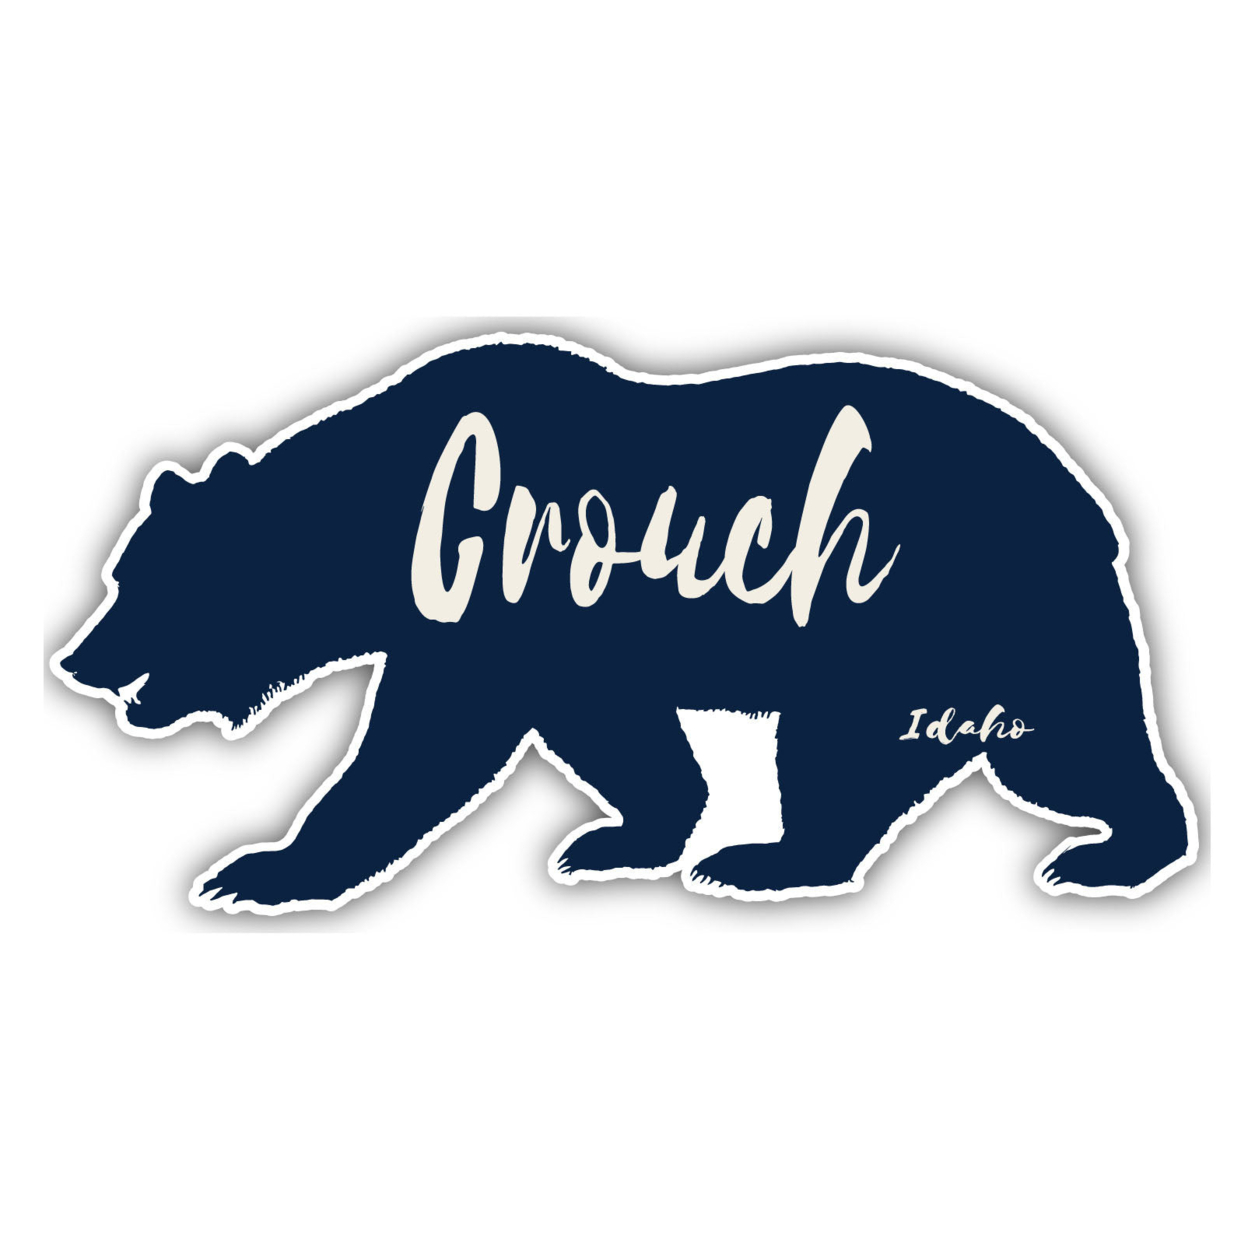 Crouch Idaho Souvenir Decorative Stickers (Choose Theme And Size) - 4-Pack, 2-Inch, Bear